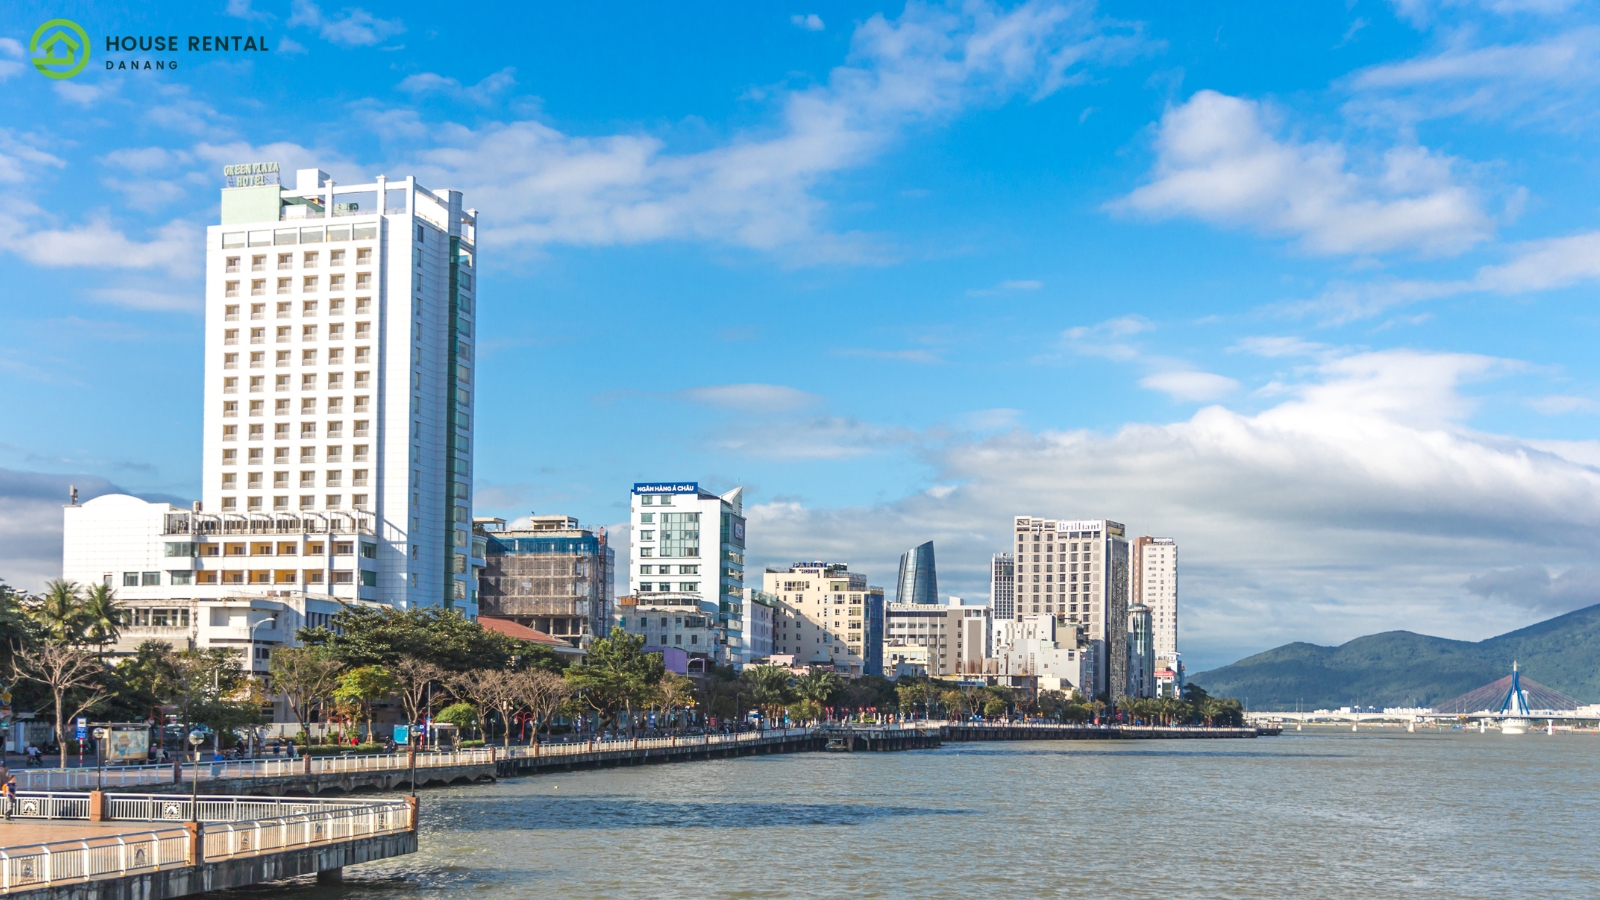 A city with tall buildings and a body of water that has a high Safety Level in Da Nang.